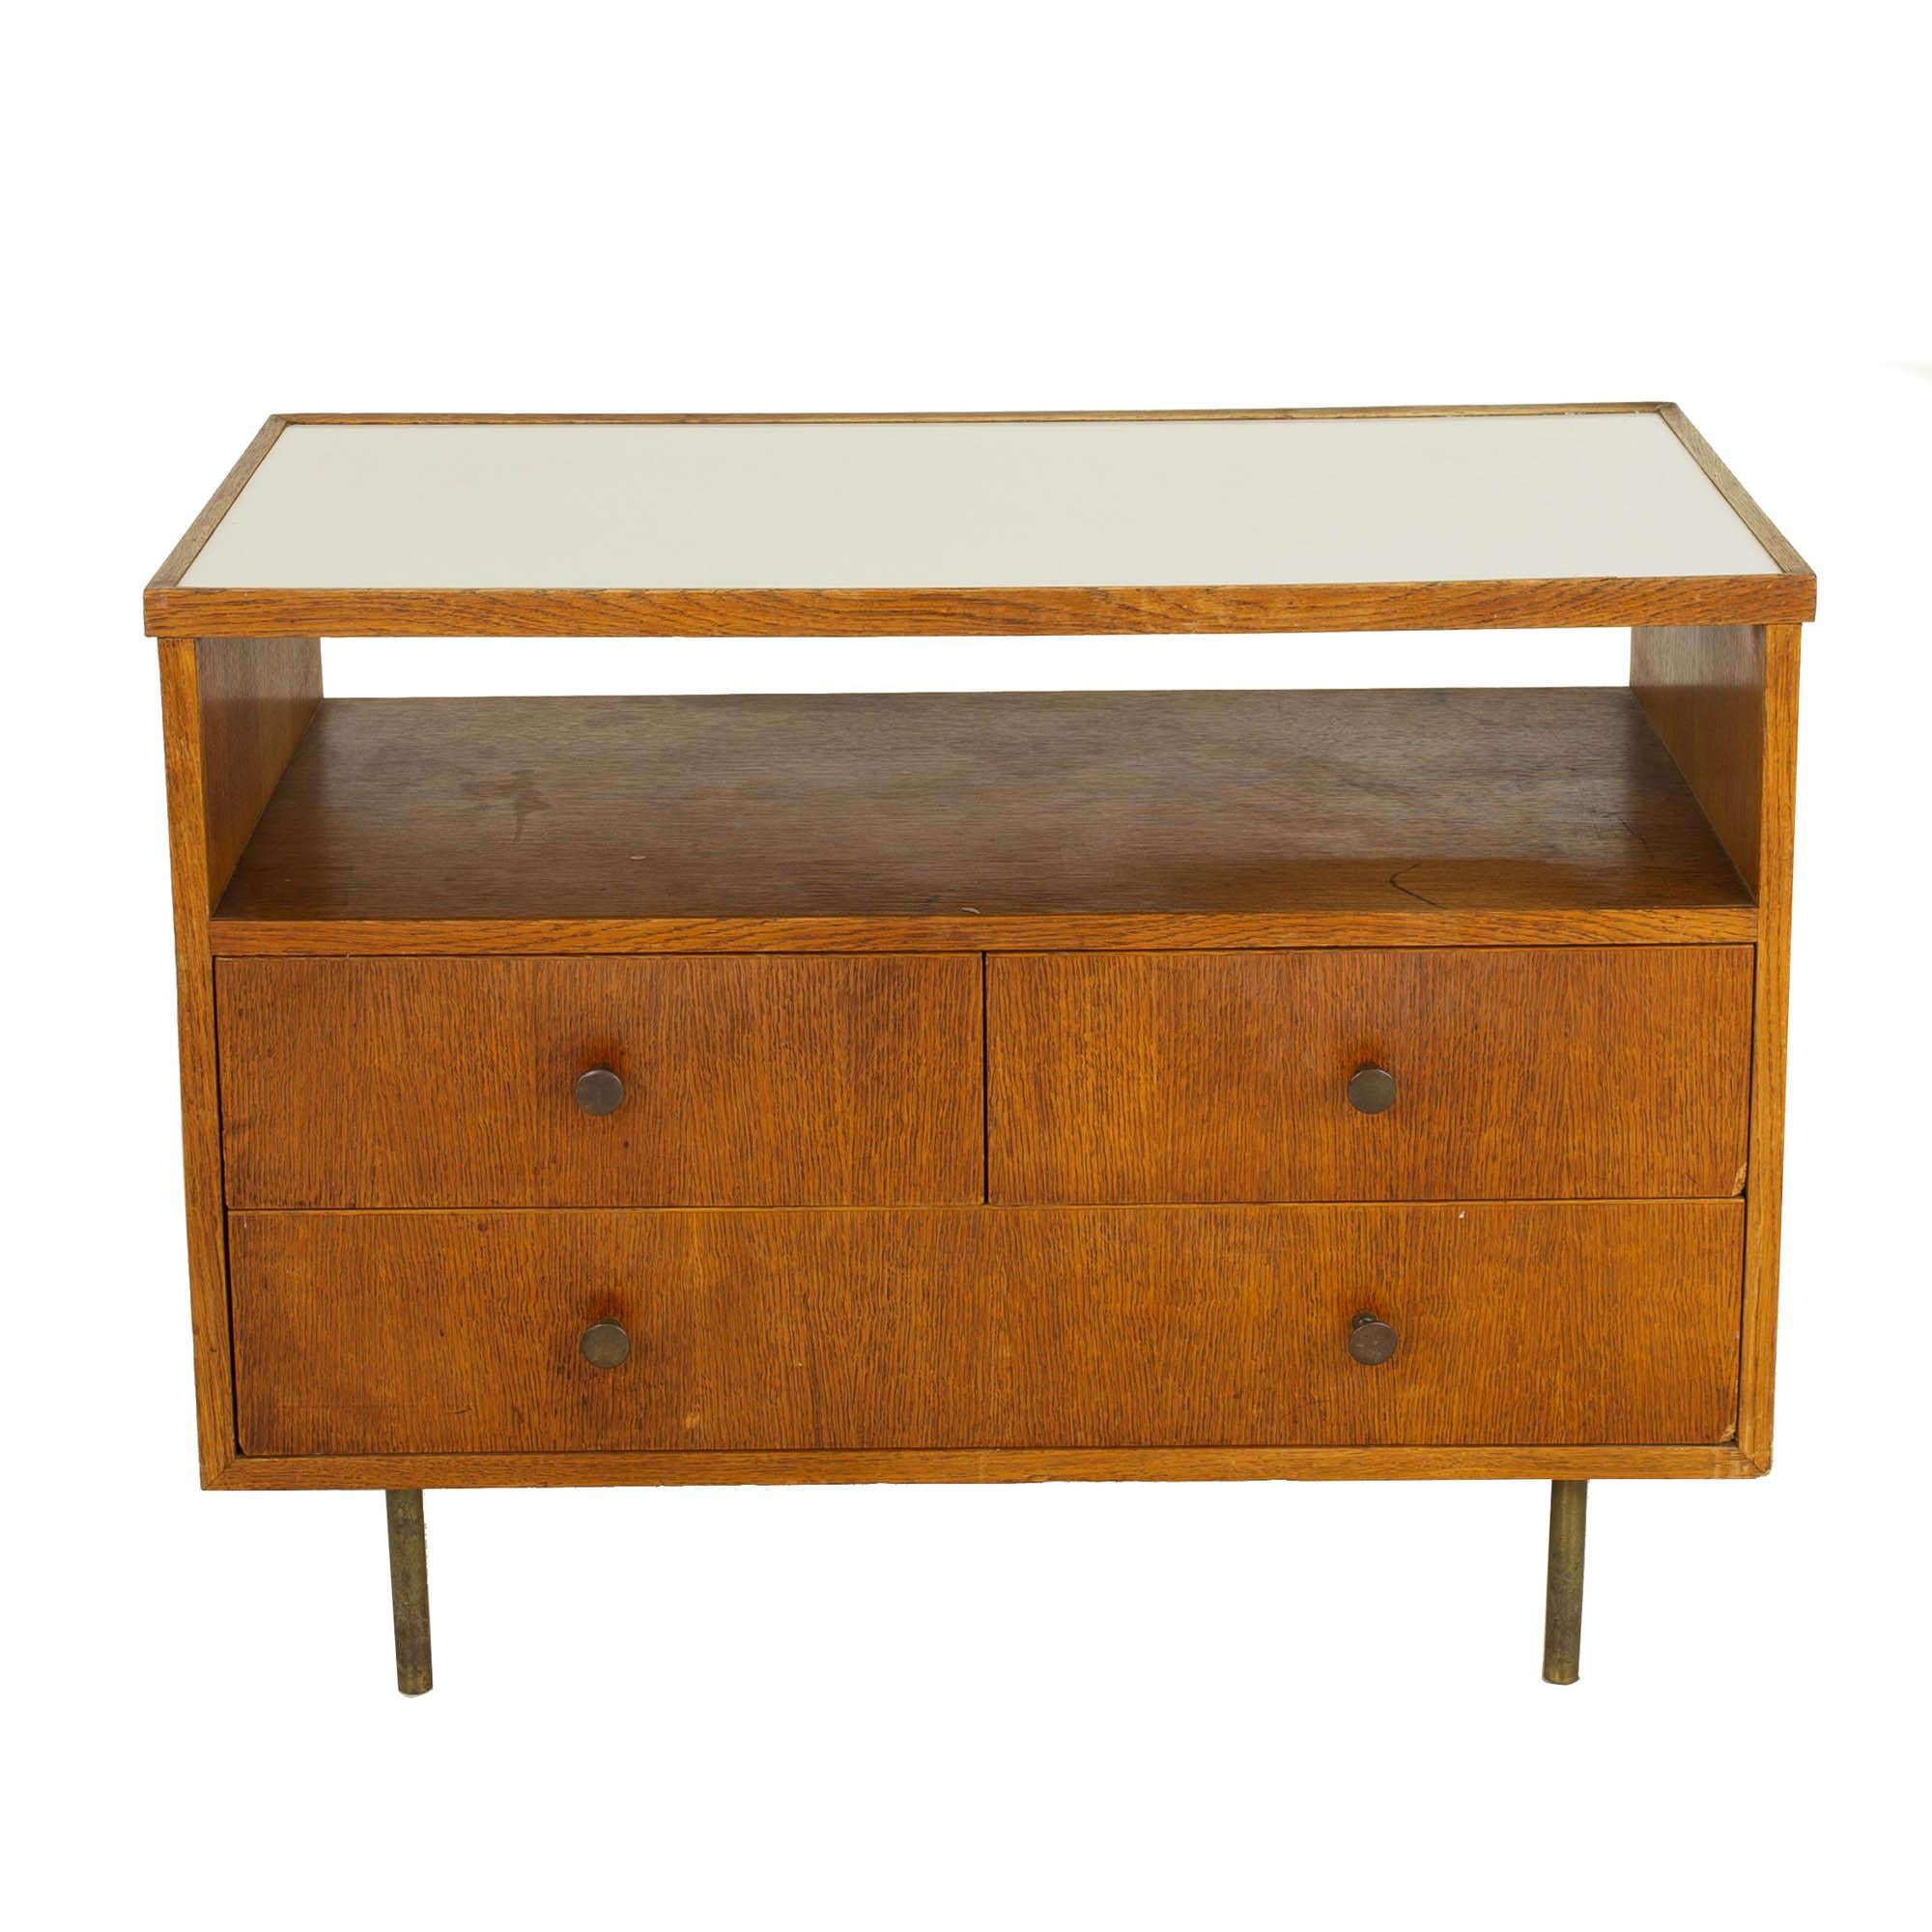 George Nelson style mid century oak bar media cabinet

This cabinet measures: 34.5 wide x 18.5 deep x 26 inches high

?All pieces of furniture can be had in what we call restored vintage condition. That means the piece is restored upon purchase